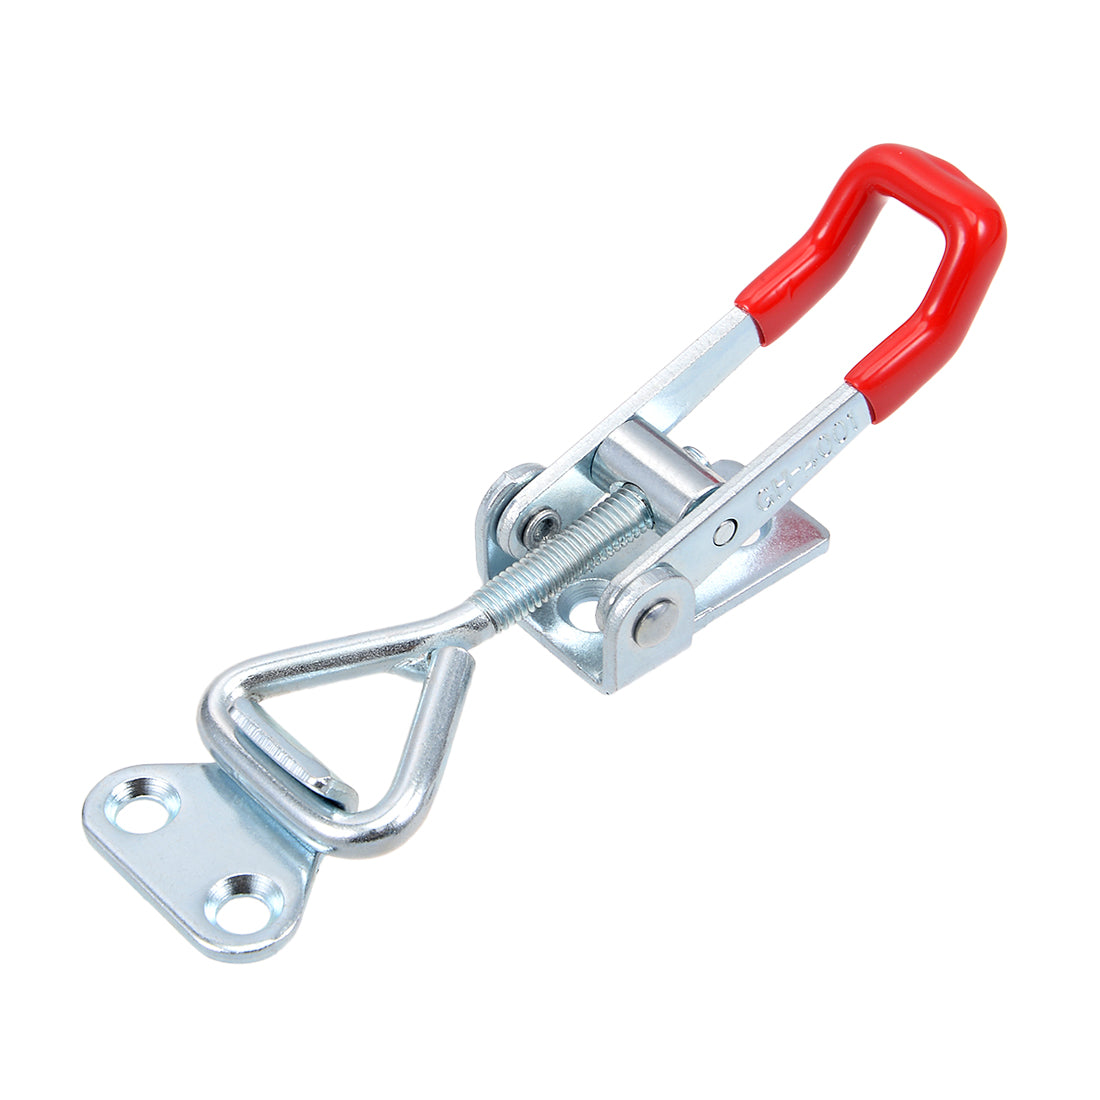 uxcell Uxcell Toggle Latch Clamp 150Kg 330lbs Capacity Pull Action Adjustable Latch GH-4001 2pcs